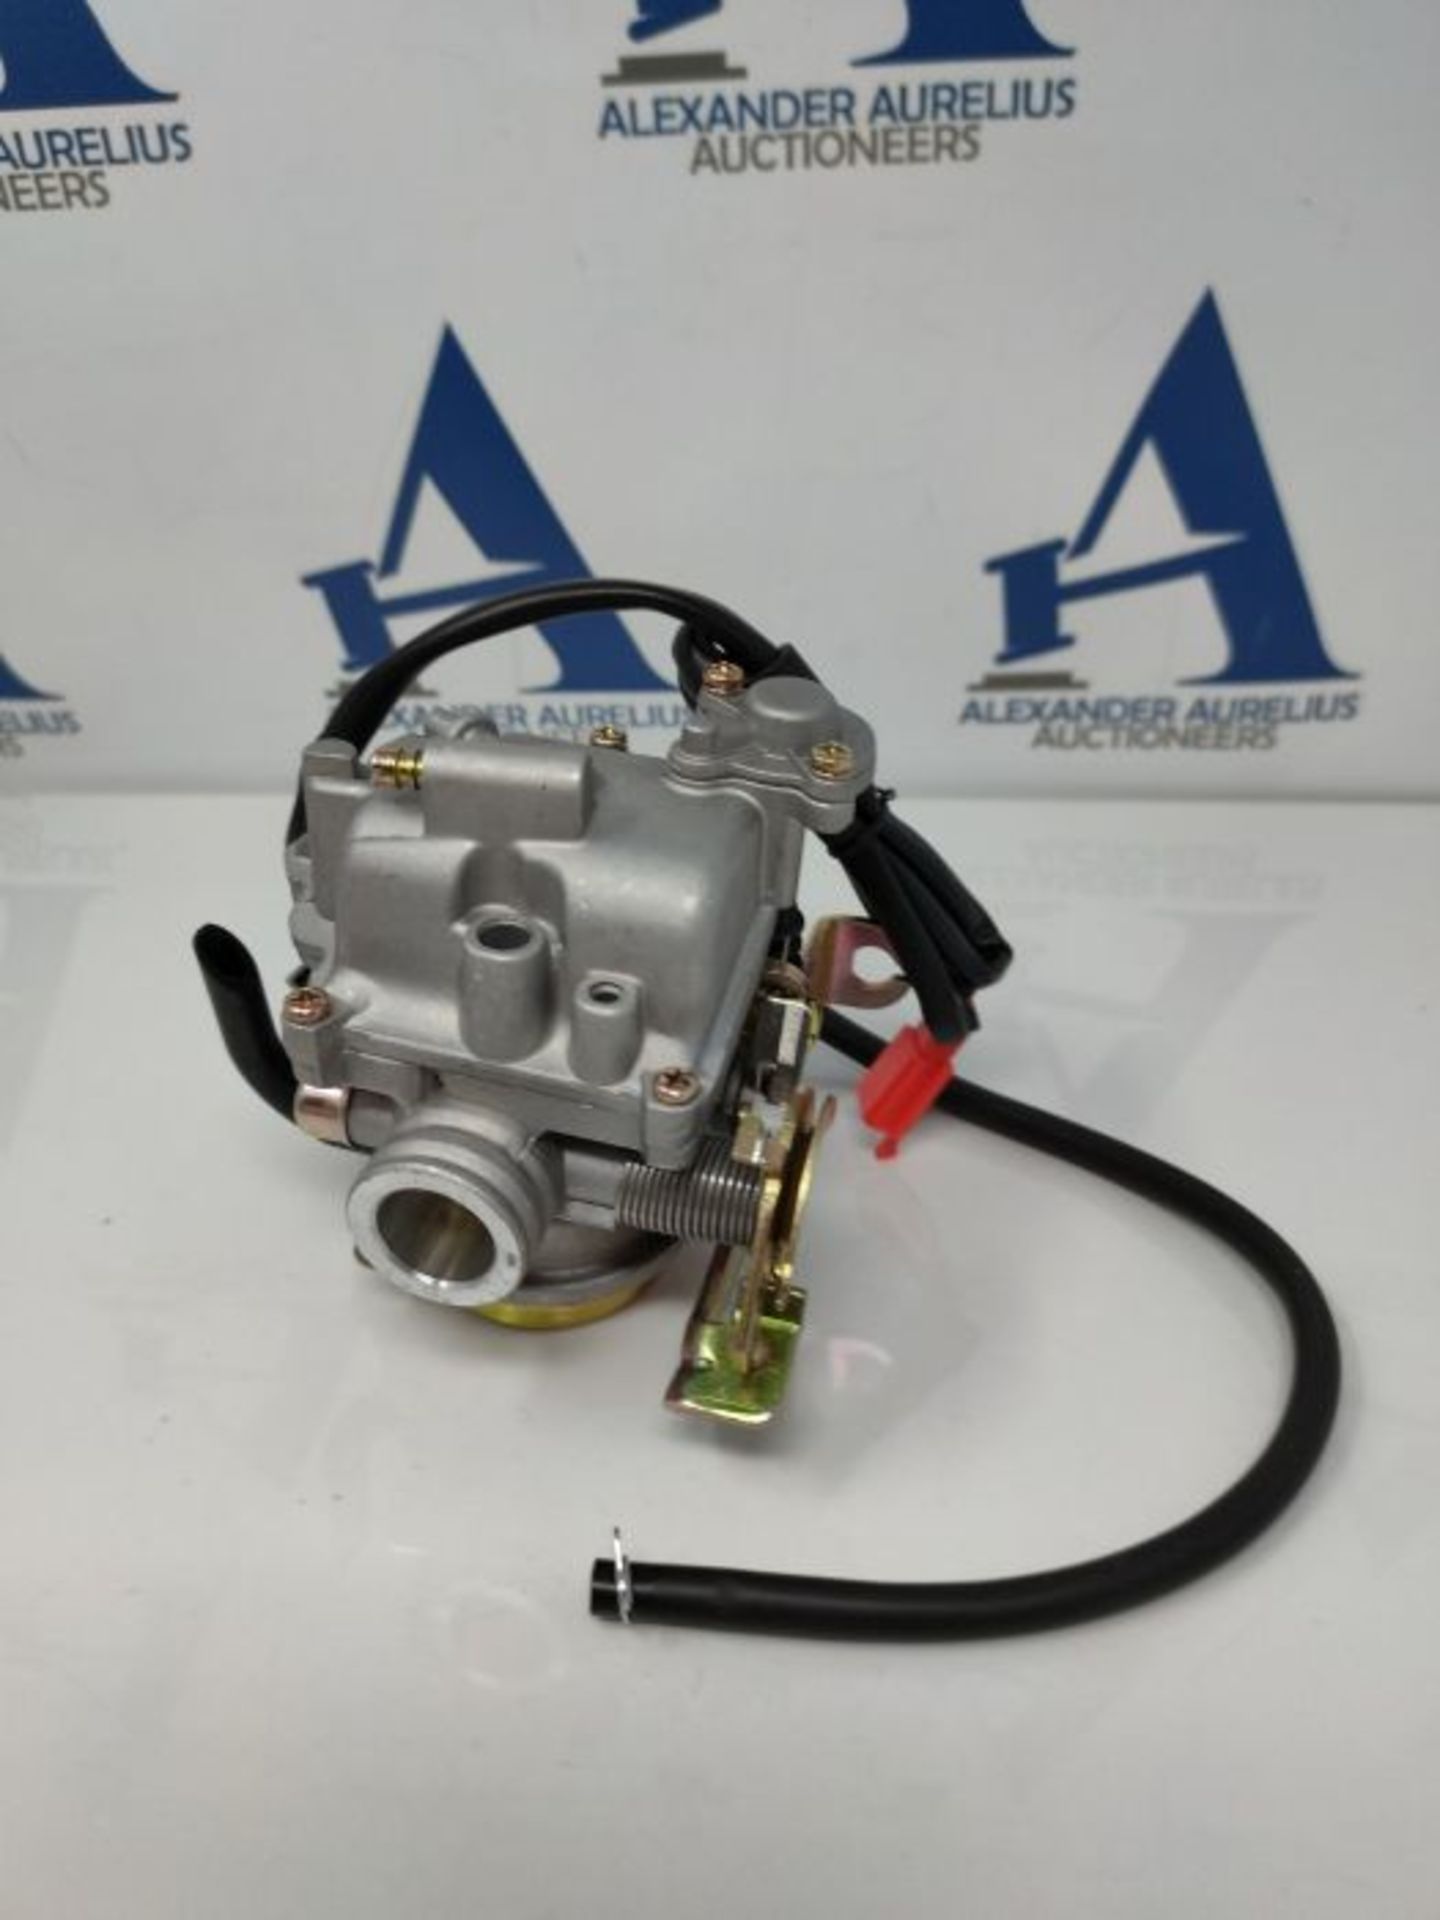 Beehive Filter Aftermarket Carb Carburetor for Scooter 50cc Chinese GY6 139QMB Moped 4 - Image 2 of 2